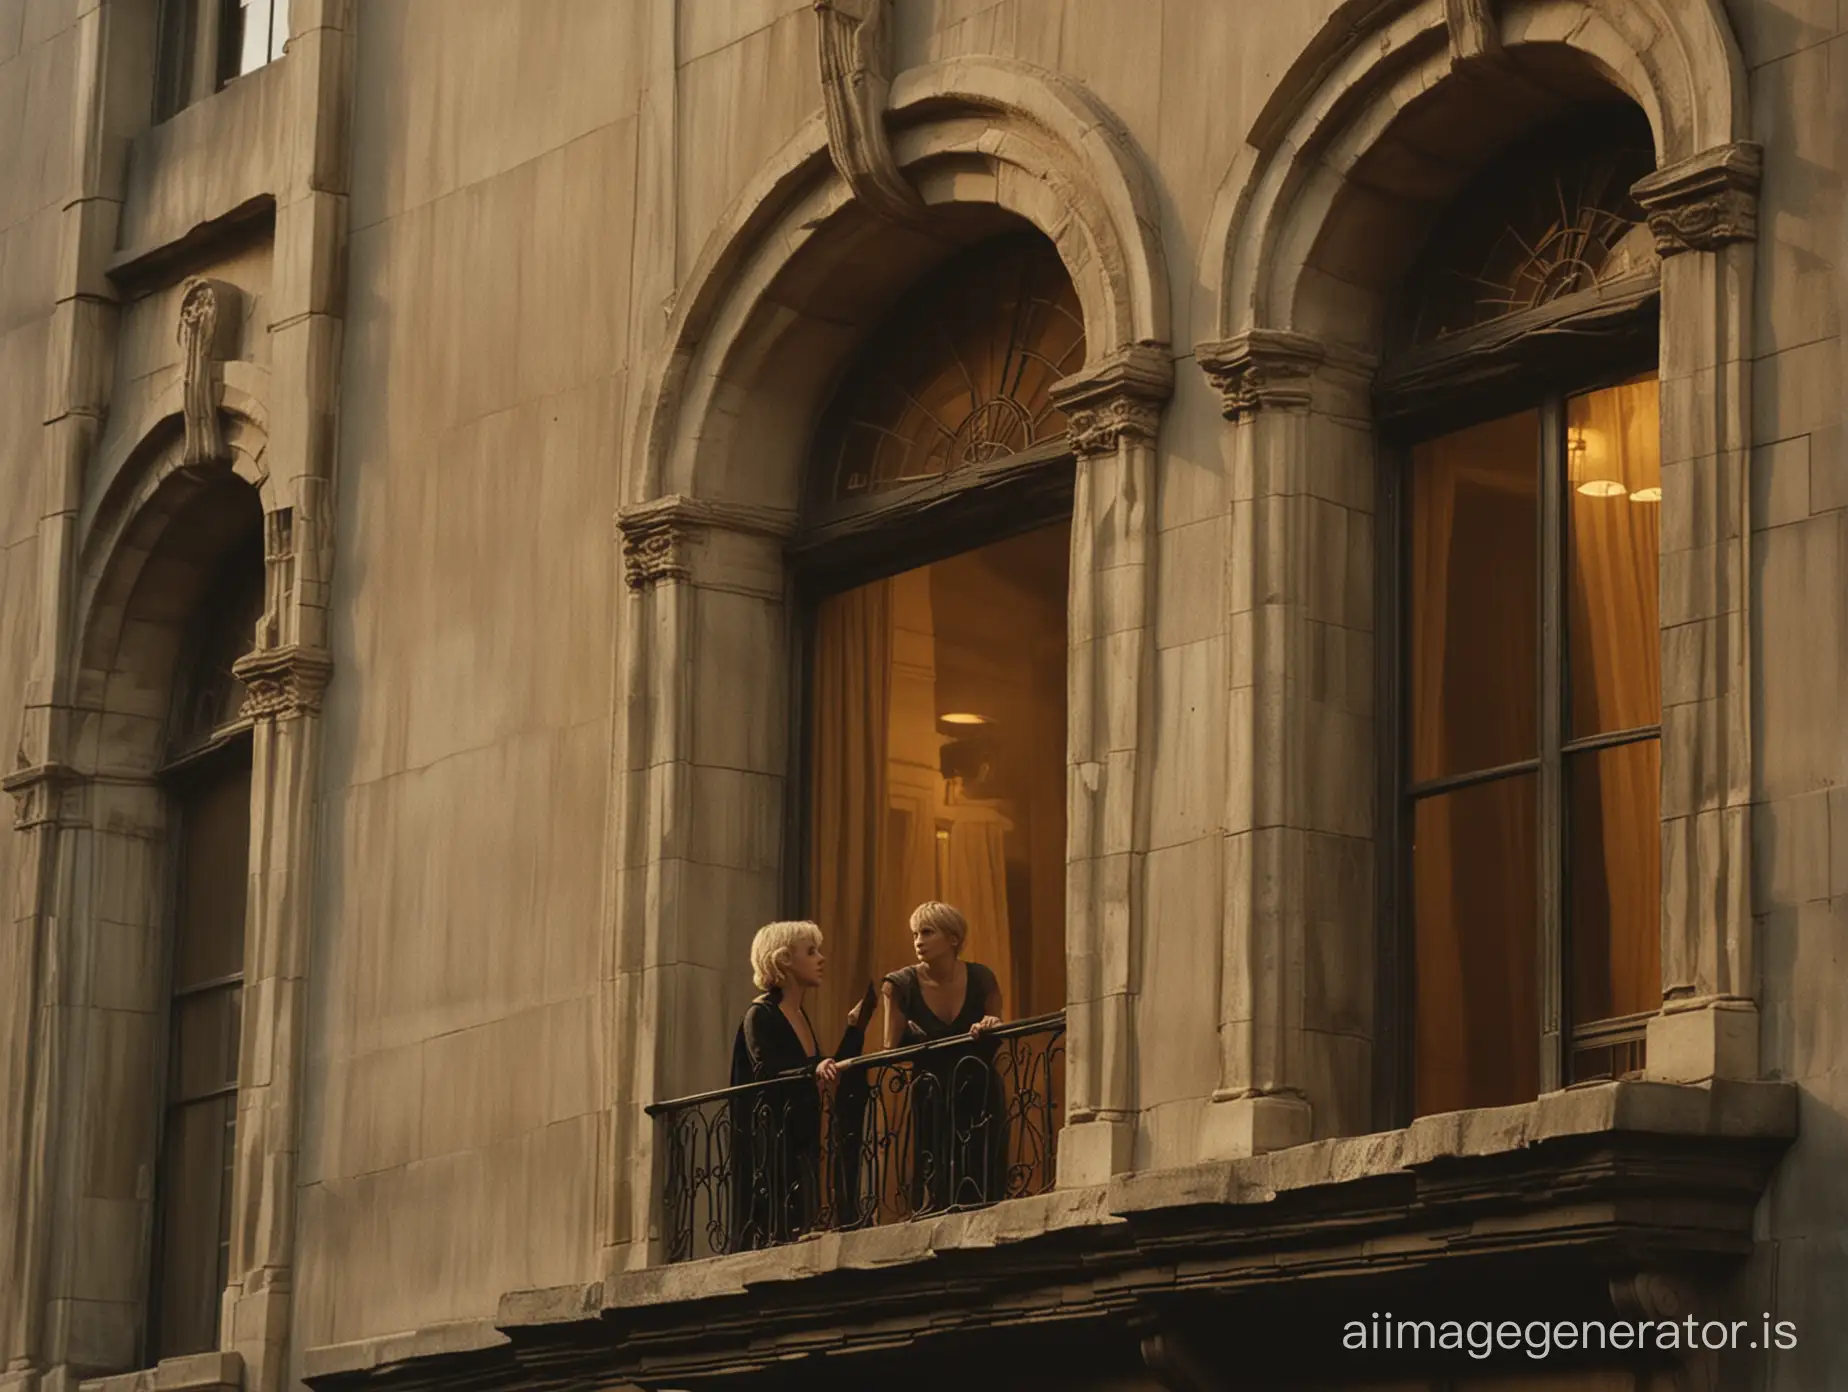 Blonde-Woman-Observing-Romanesque-Architecture-at-Sunset-Blade-Runner-Inspired-Scene